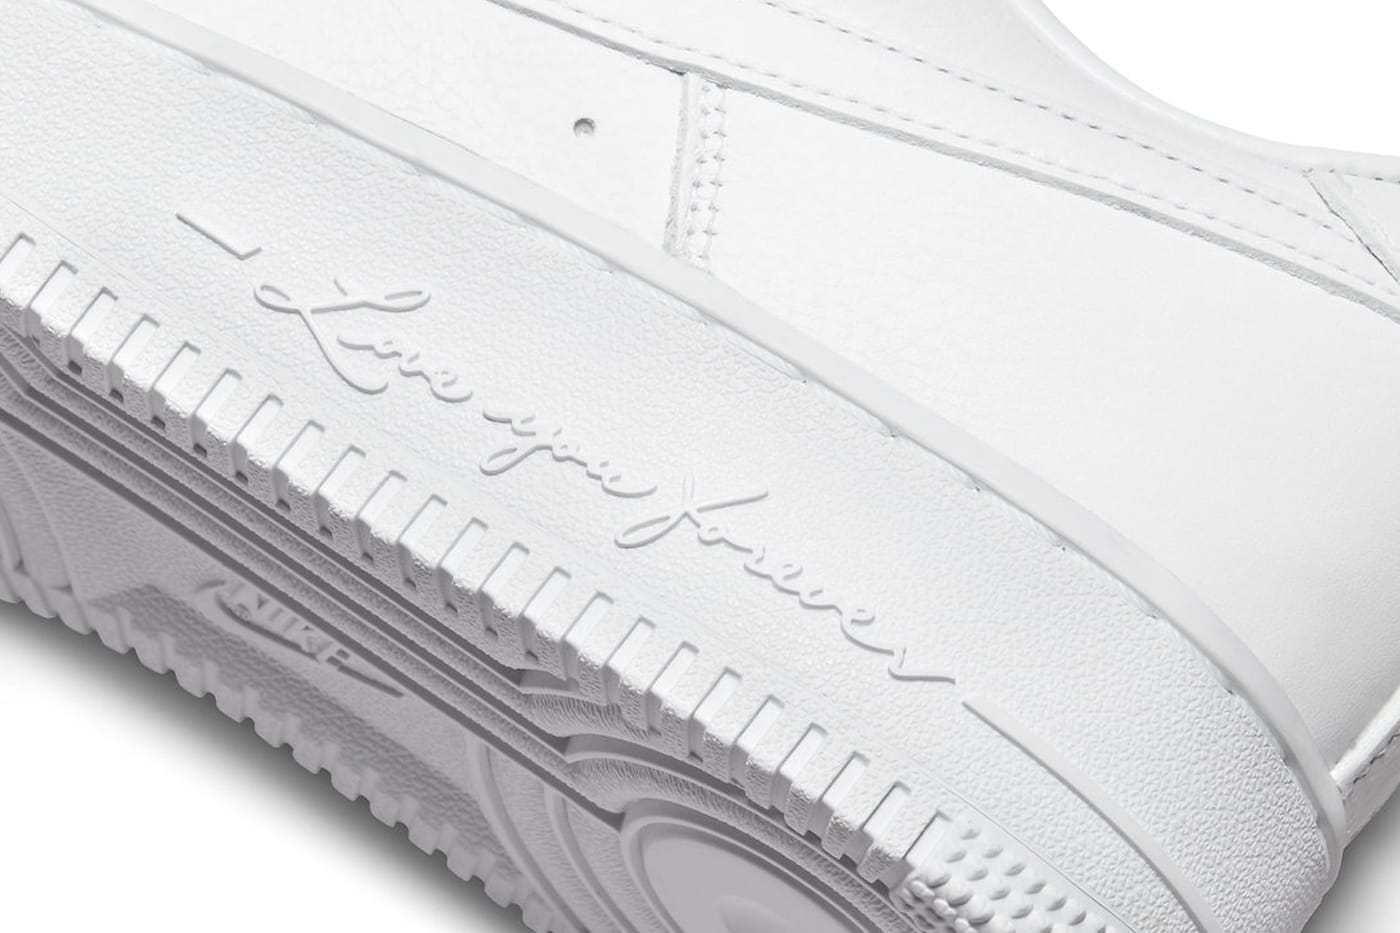 Drake NOCTA x Nike Air Force 1 Low "Certified Lover Boy" Release